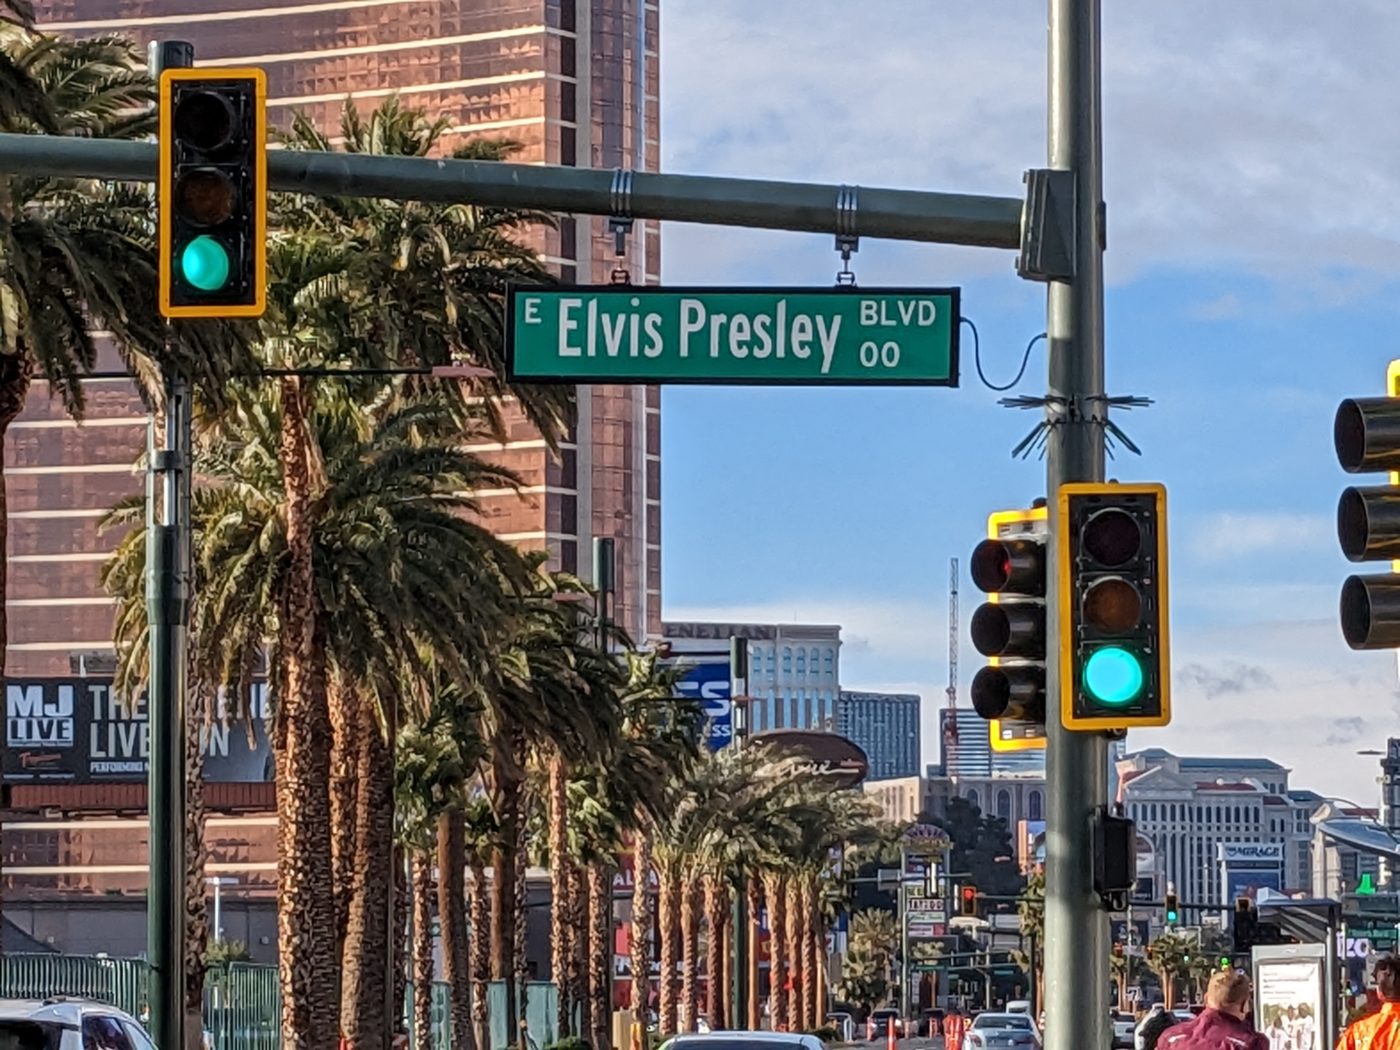 Photo of Las Vegas Boulevard taken in February 2023 that includes a close up of the street sign for Elvis Presley Boulevard.